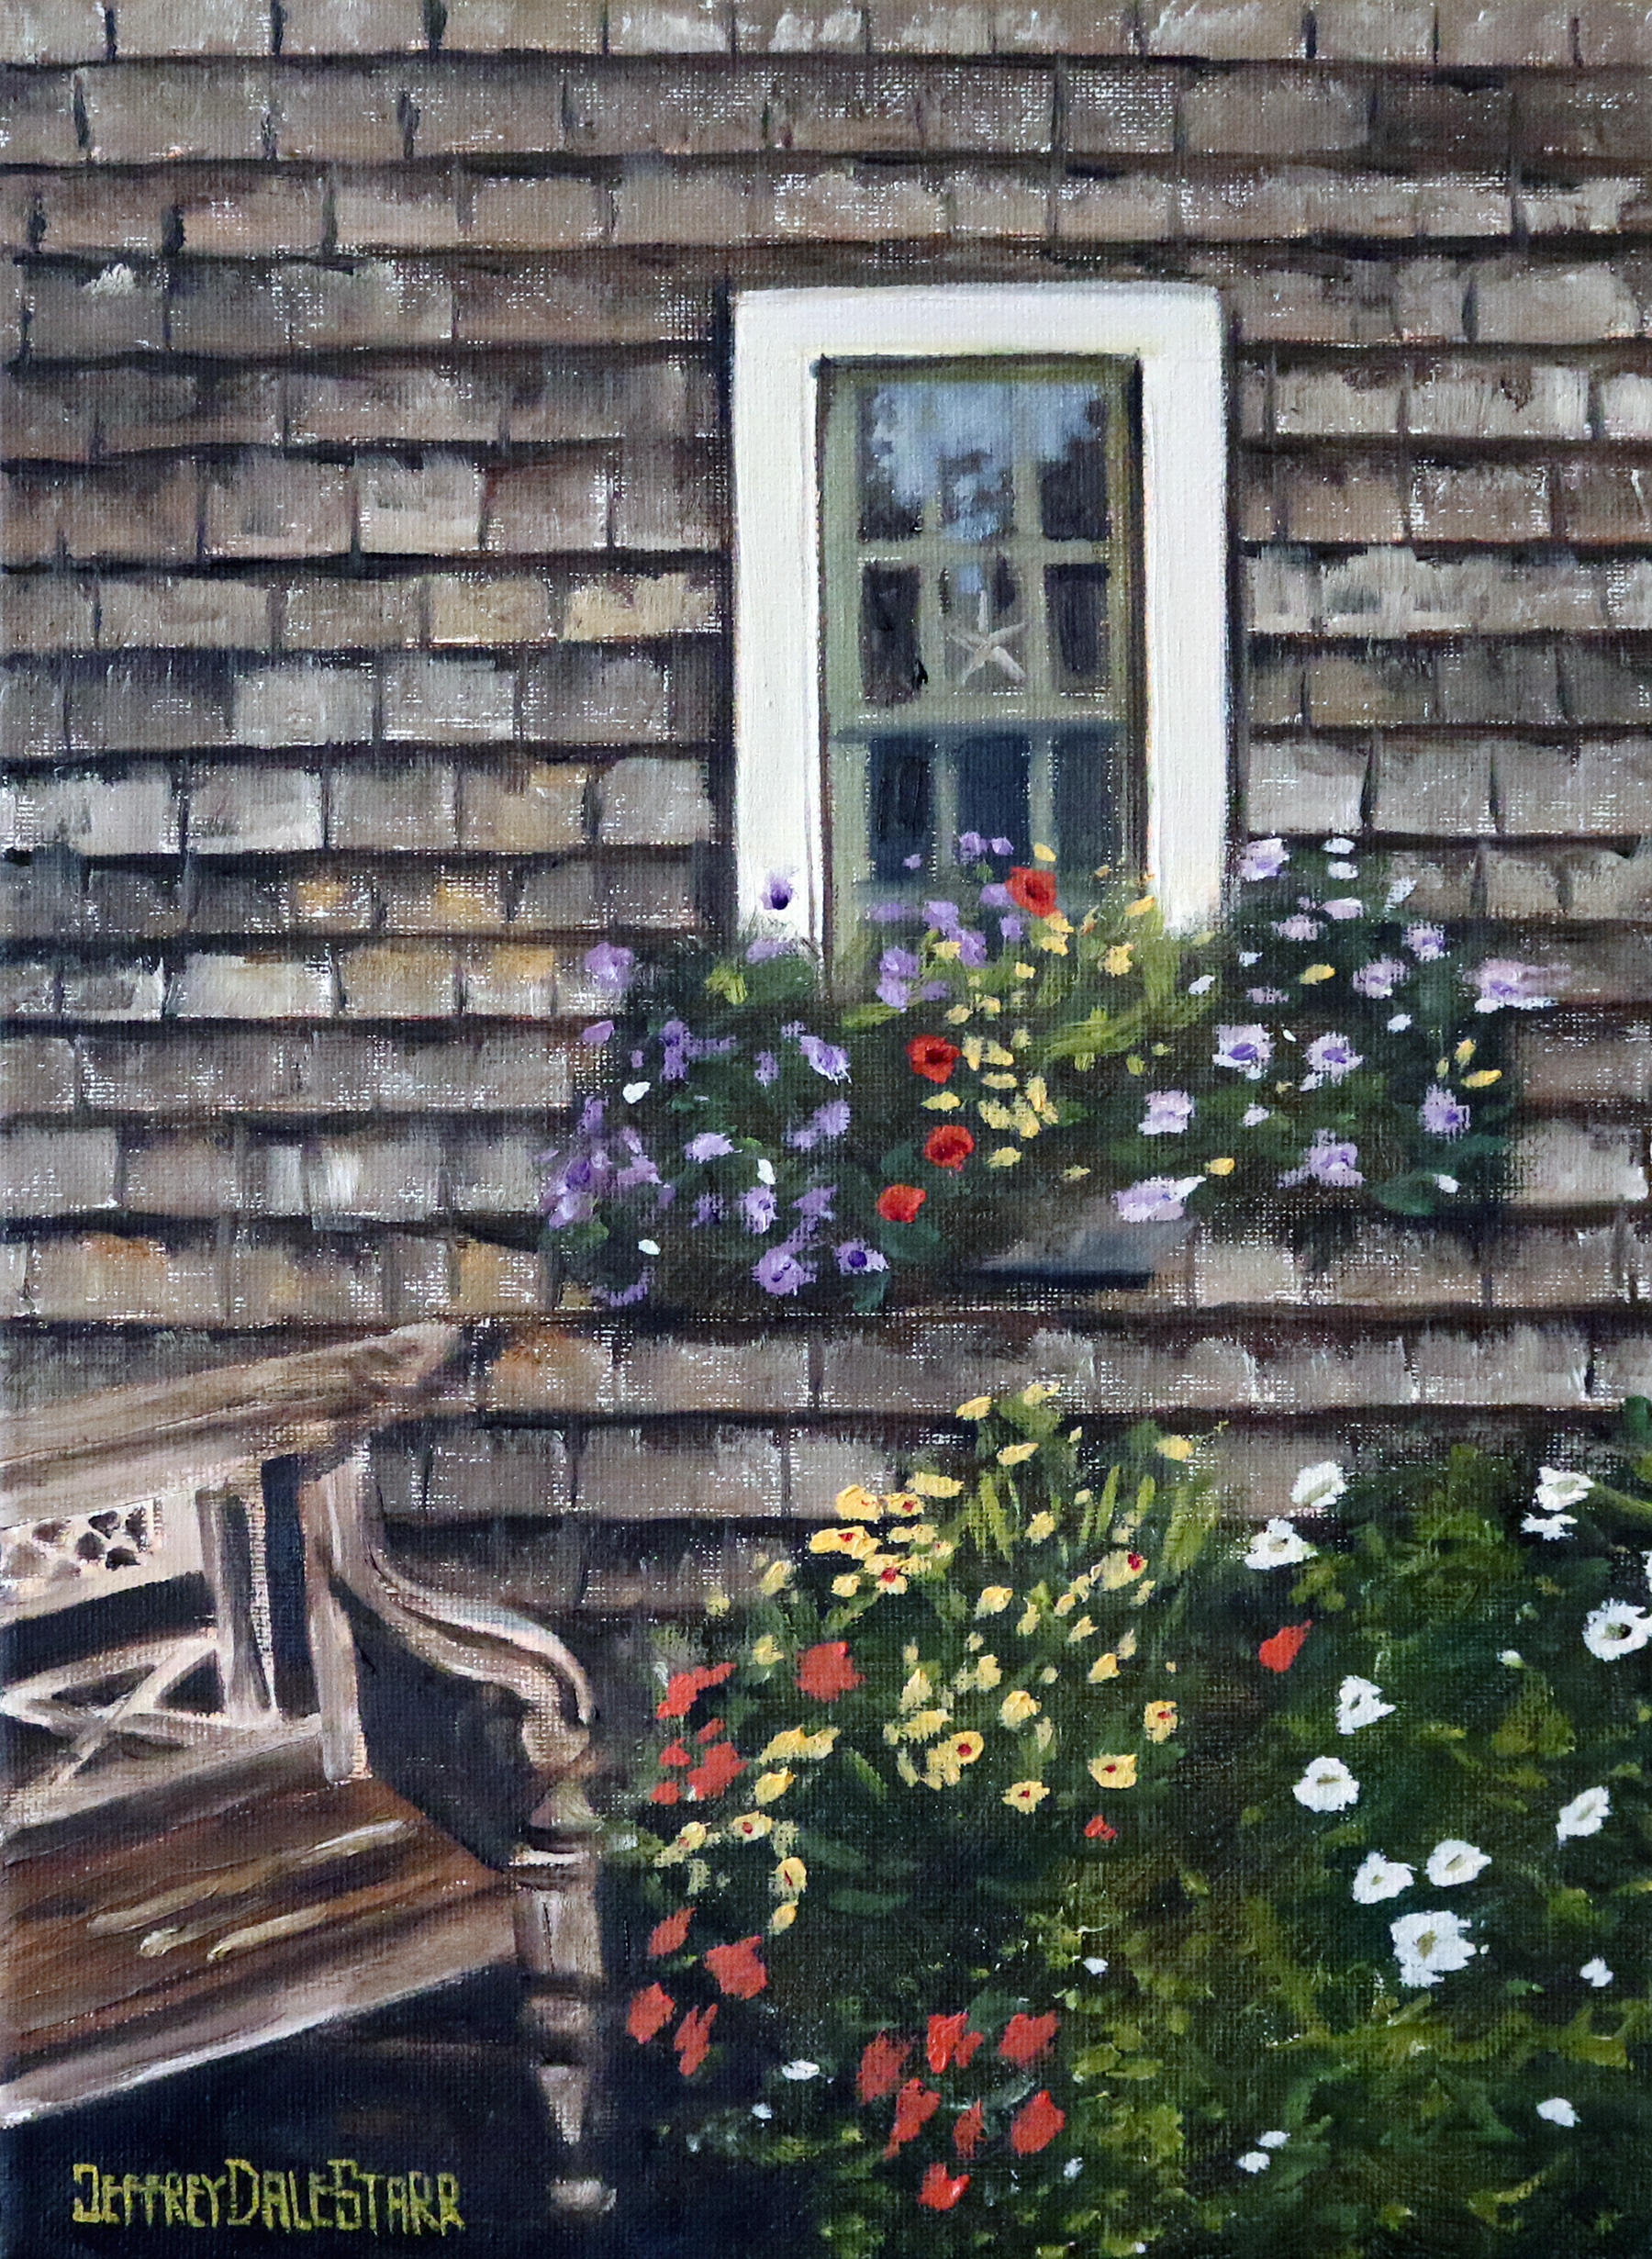 Patio of Flowers on Cape Cod by Jeffrey Dale Starr